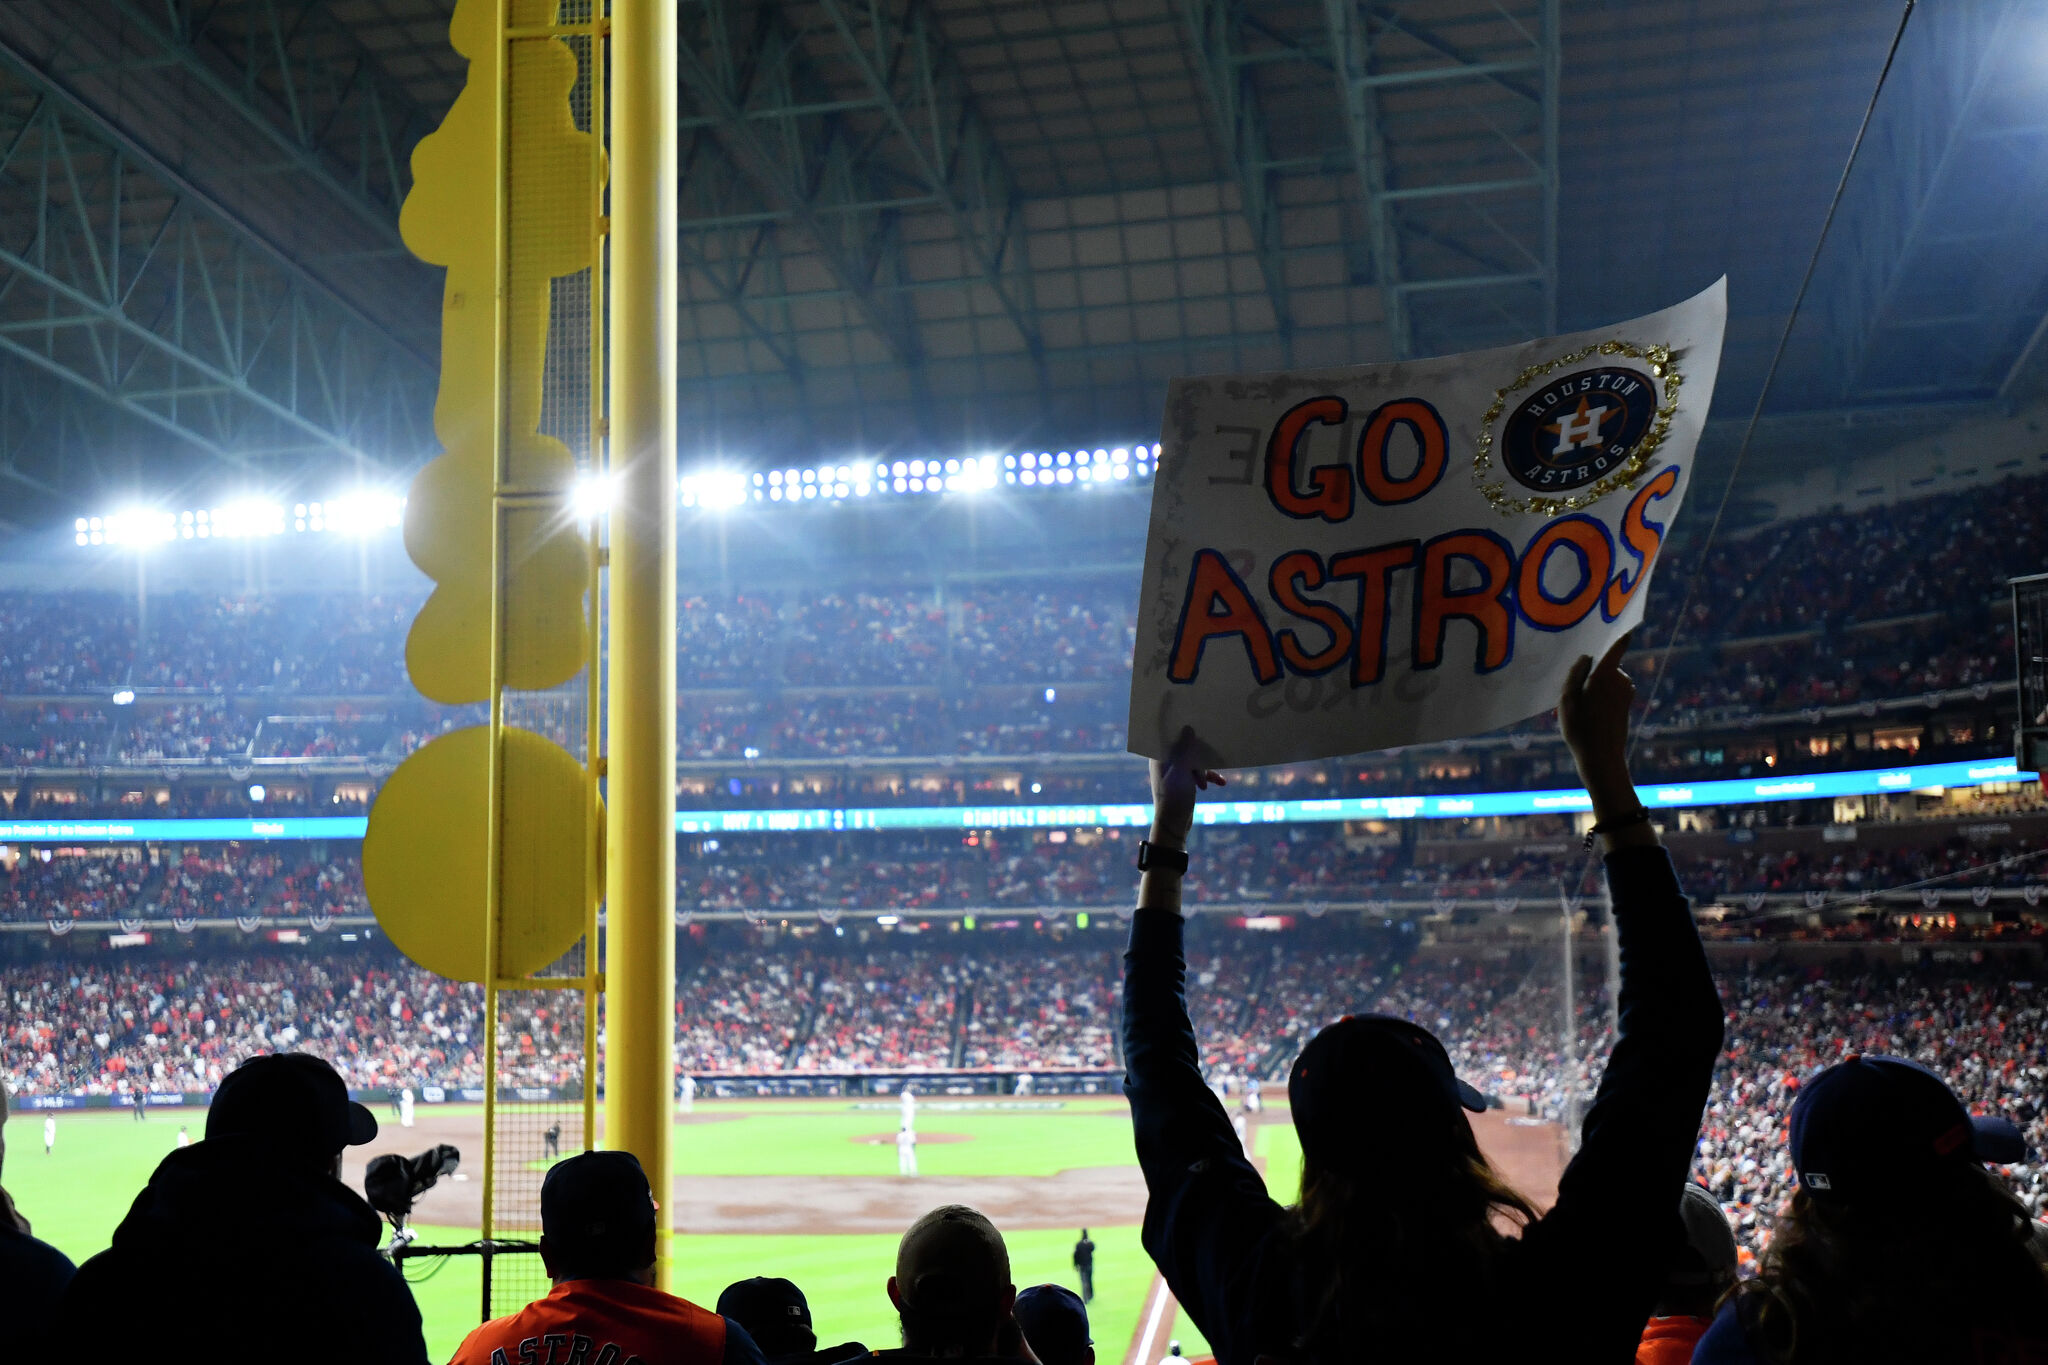 Astros fans, here's what to expect at Game 2 of the ALCS